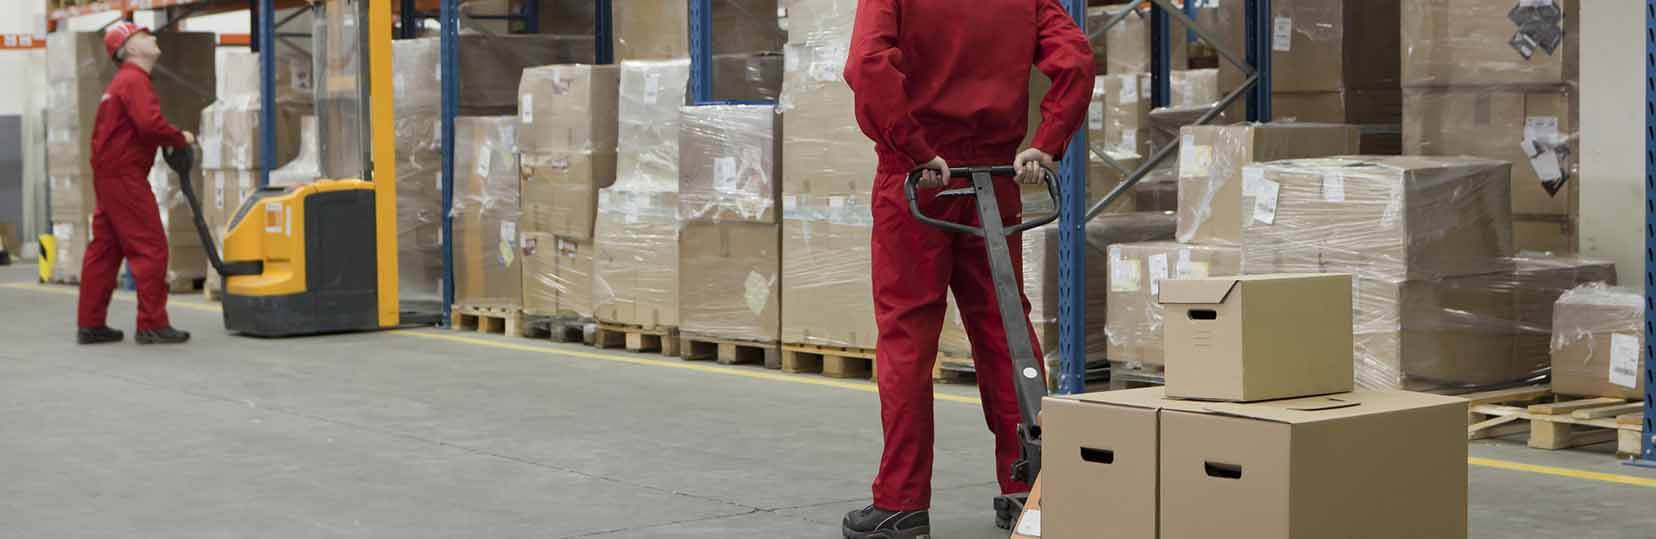 Two men wearing red suits inside a storage facility